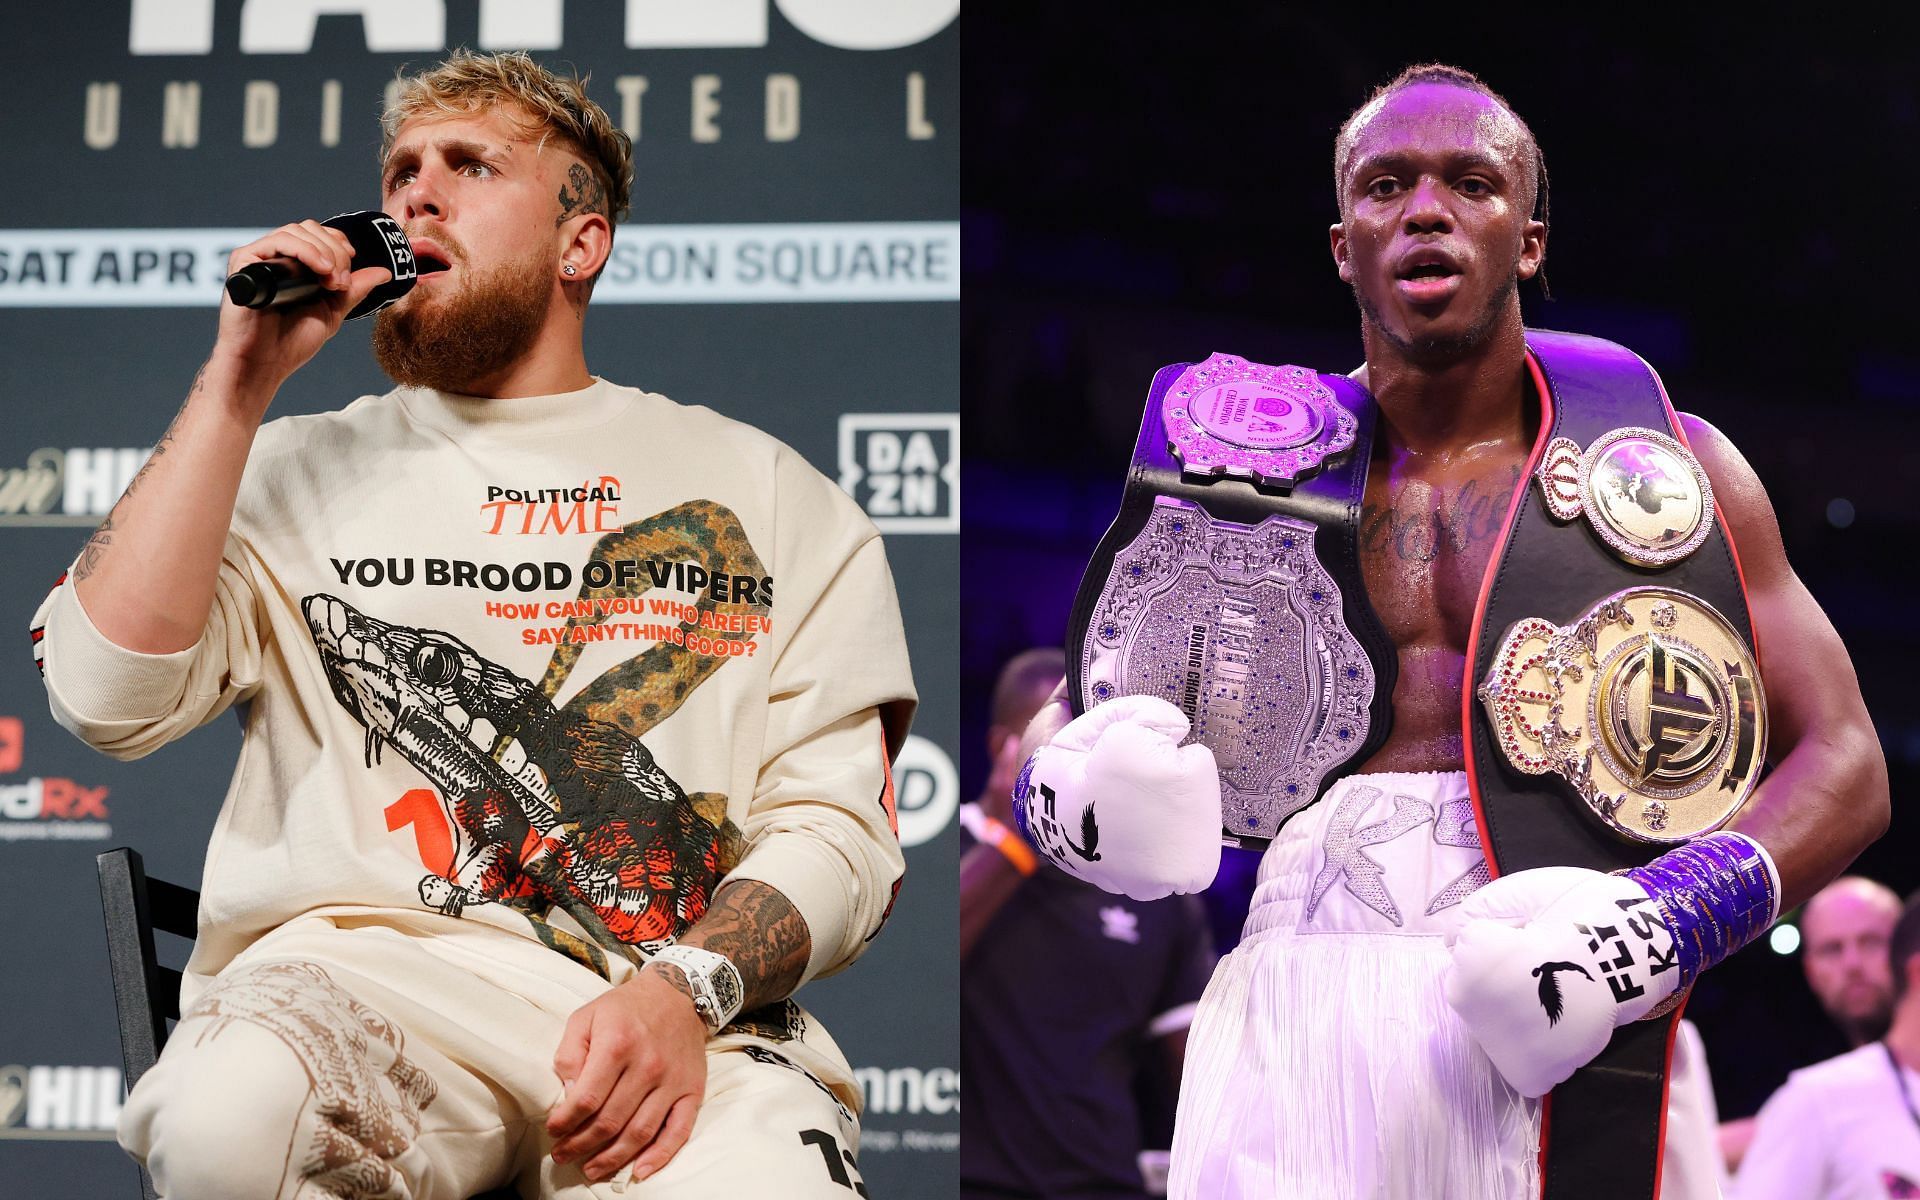 Jake Paul (left) and KSI (right) (Image credits Getty Images)